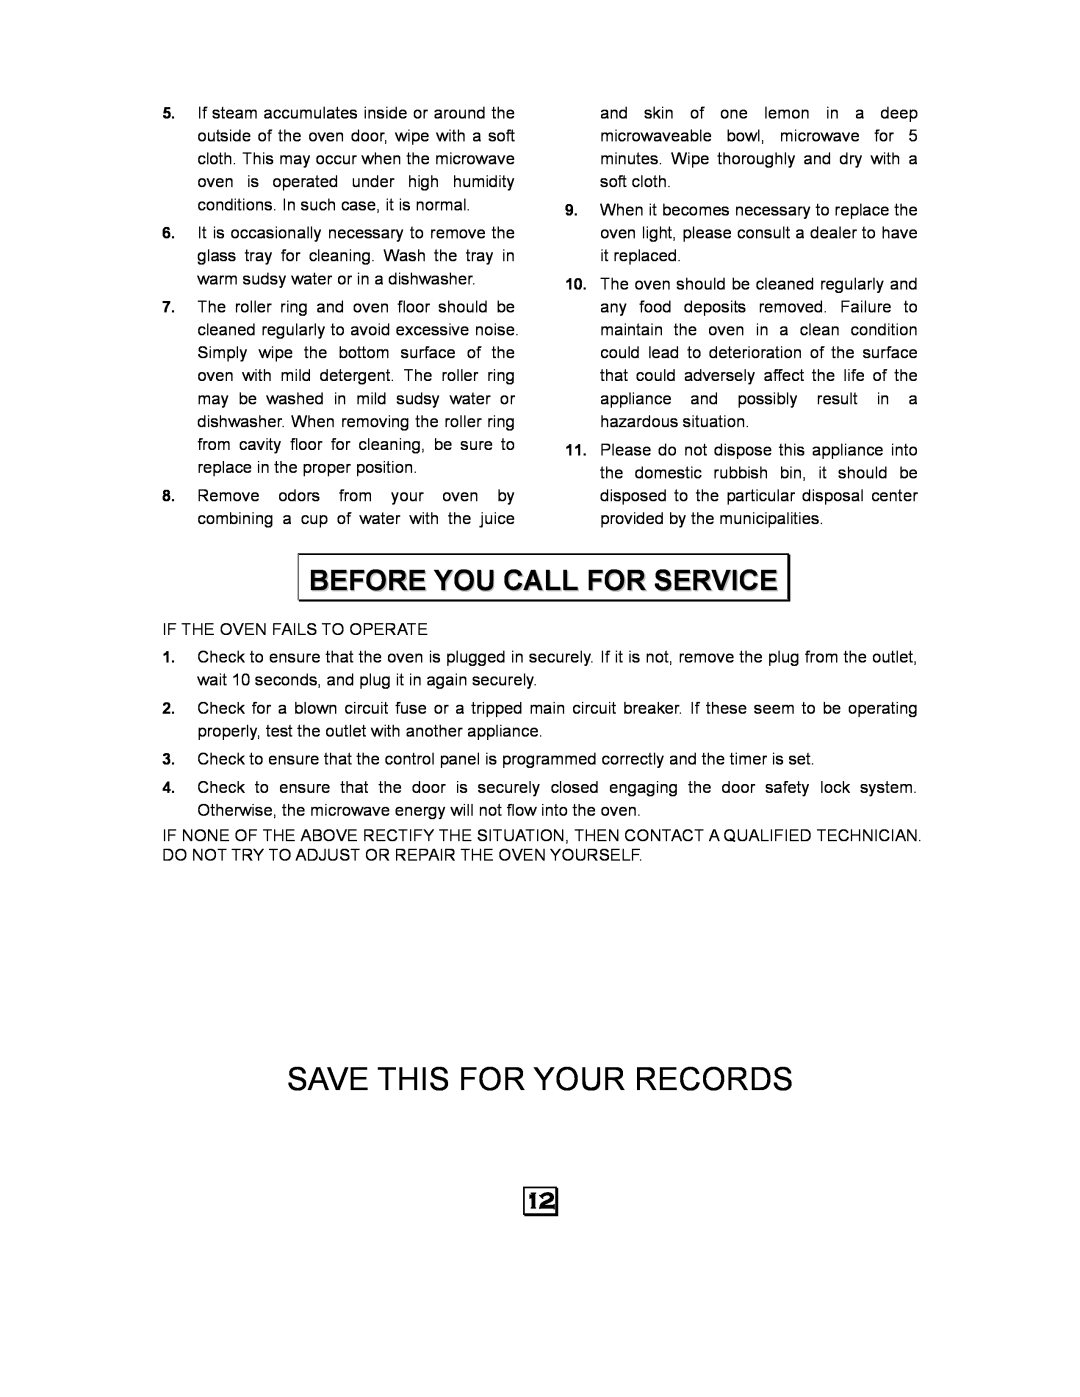 Kenmore 87090 owner manual Save This For Your Records, Before You Call For Service 